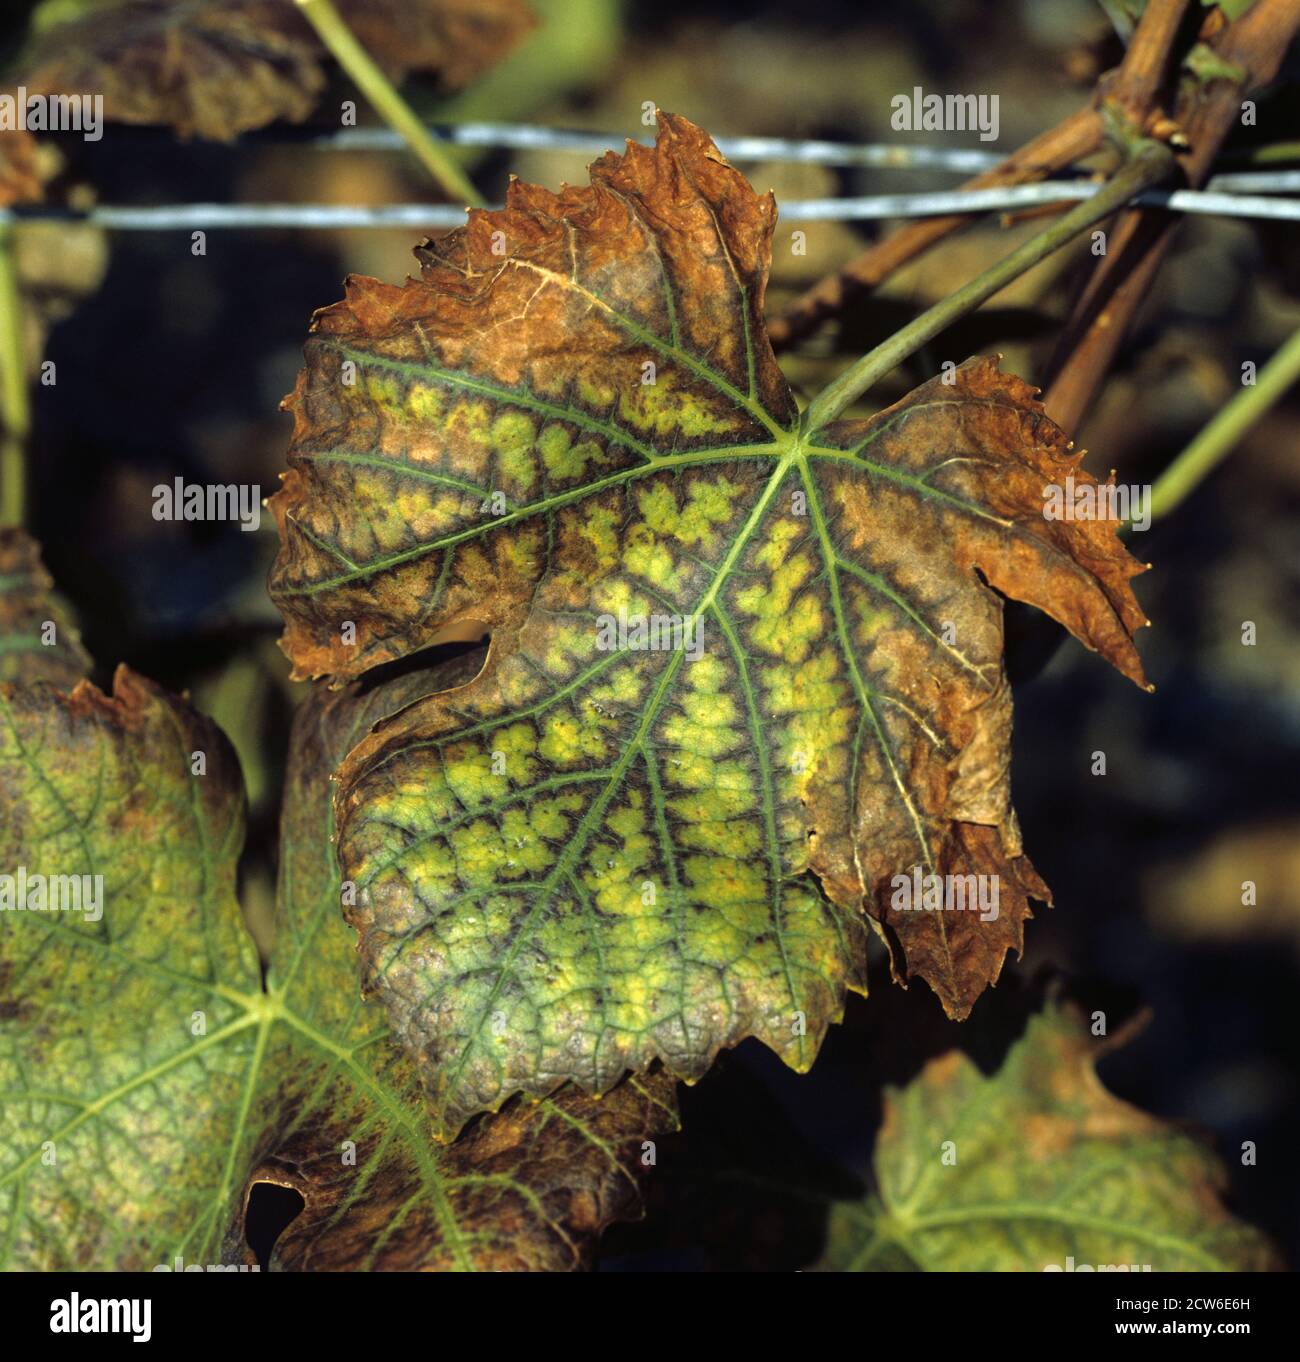 Necrotic lesions and damage on the margin of a Pinot Noir grapevine leaf caused by manganese deficiency, Champagne, France Stock Photo